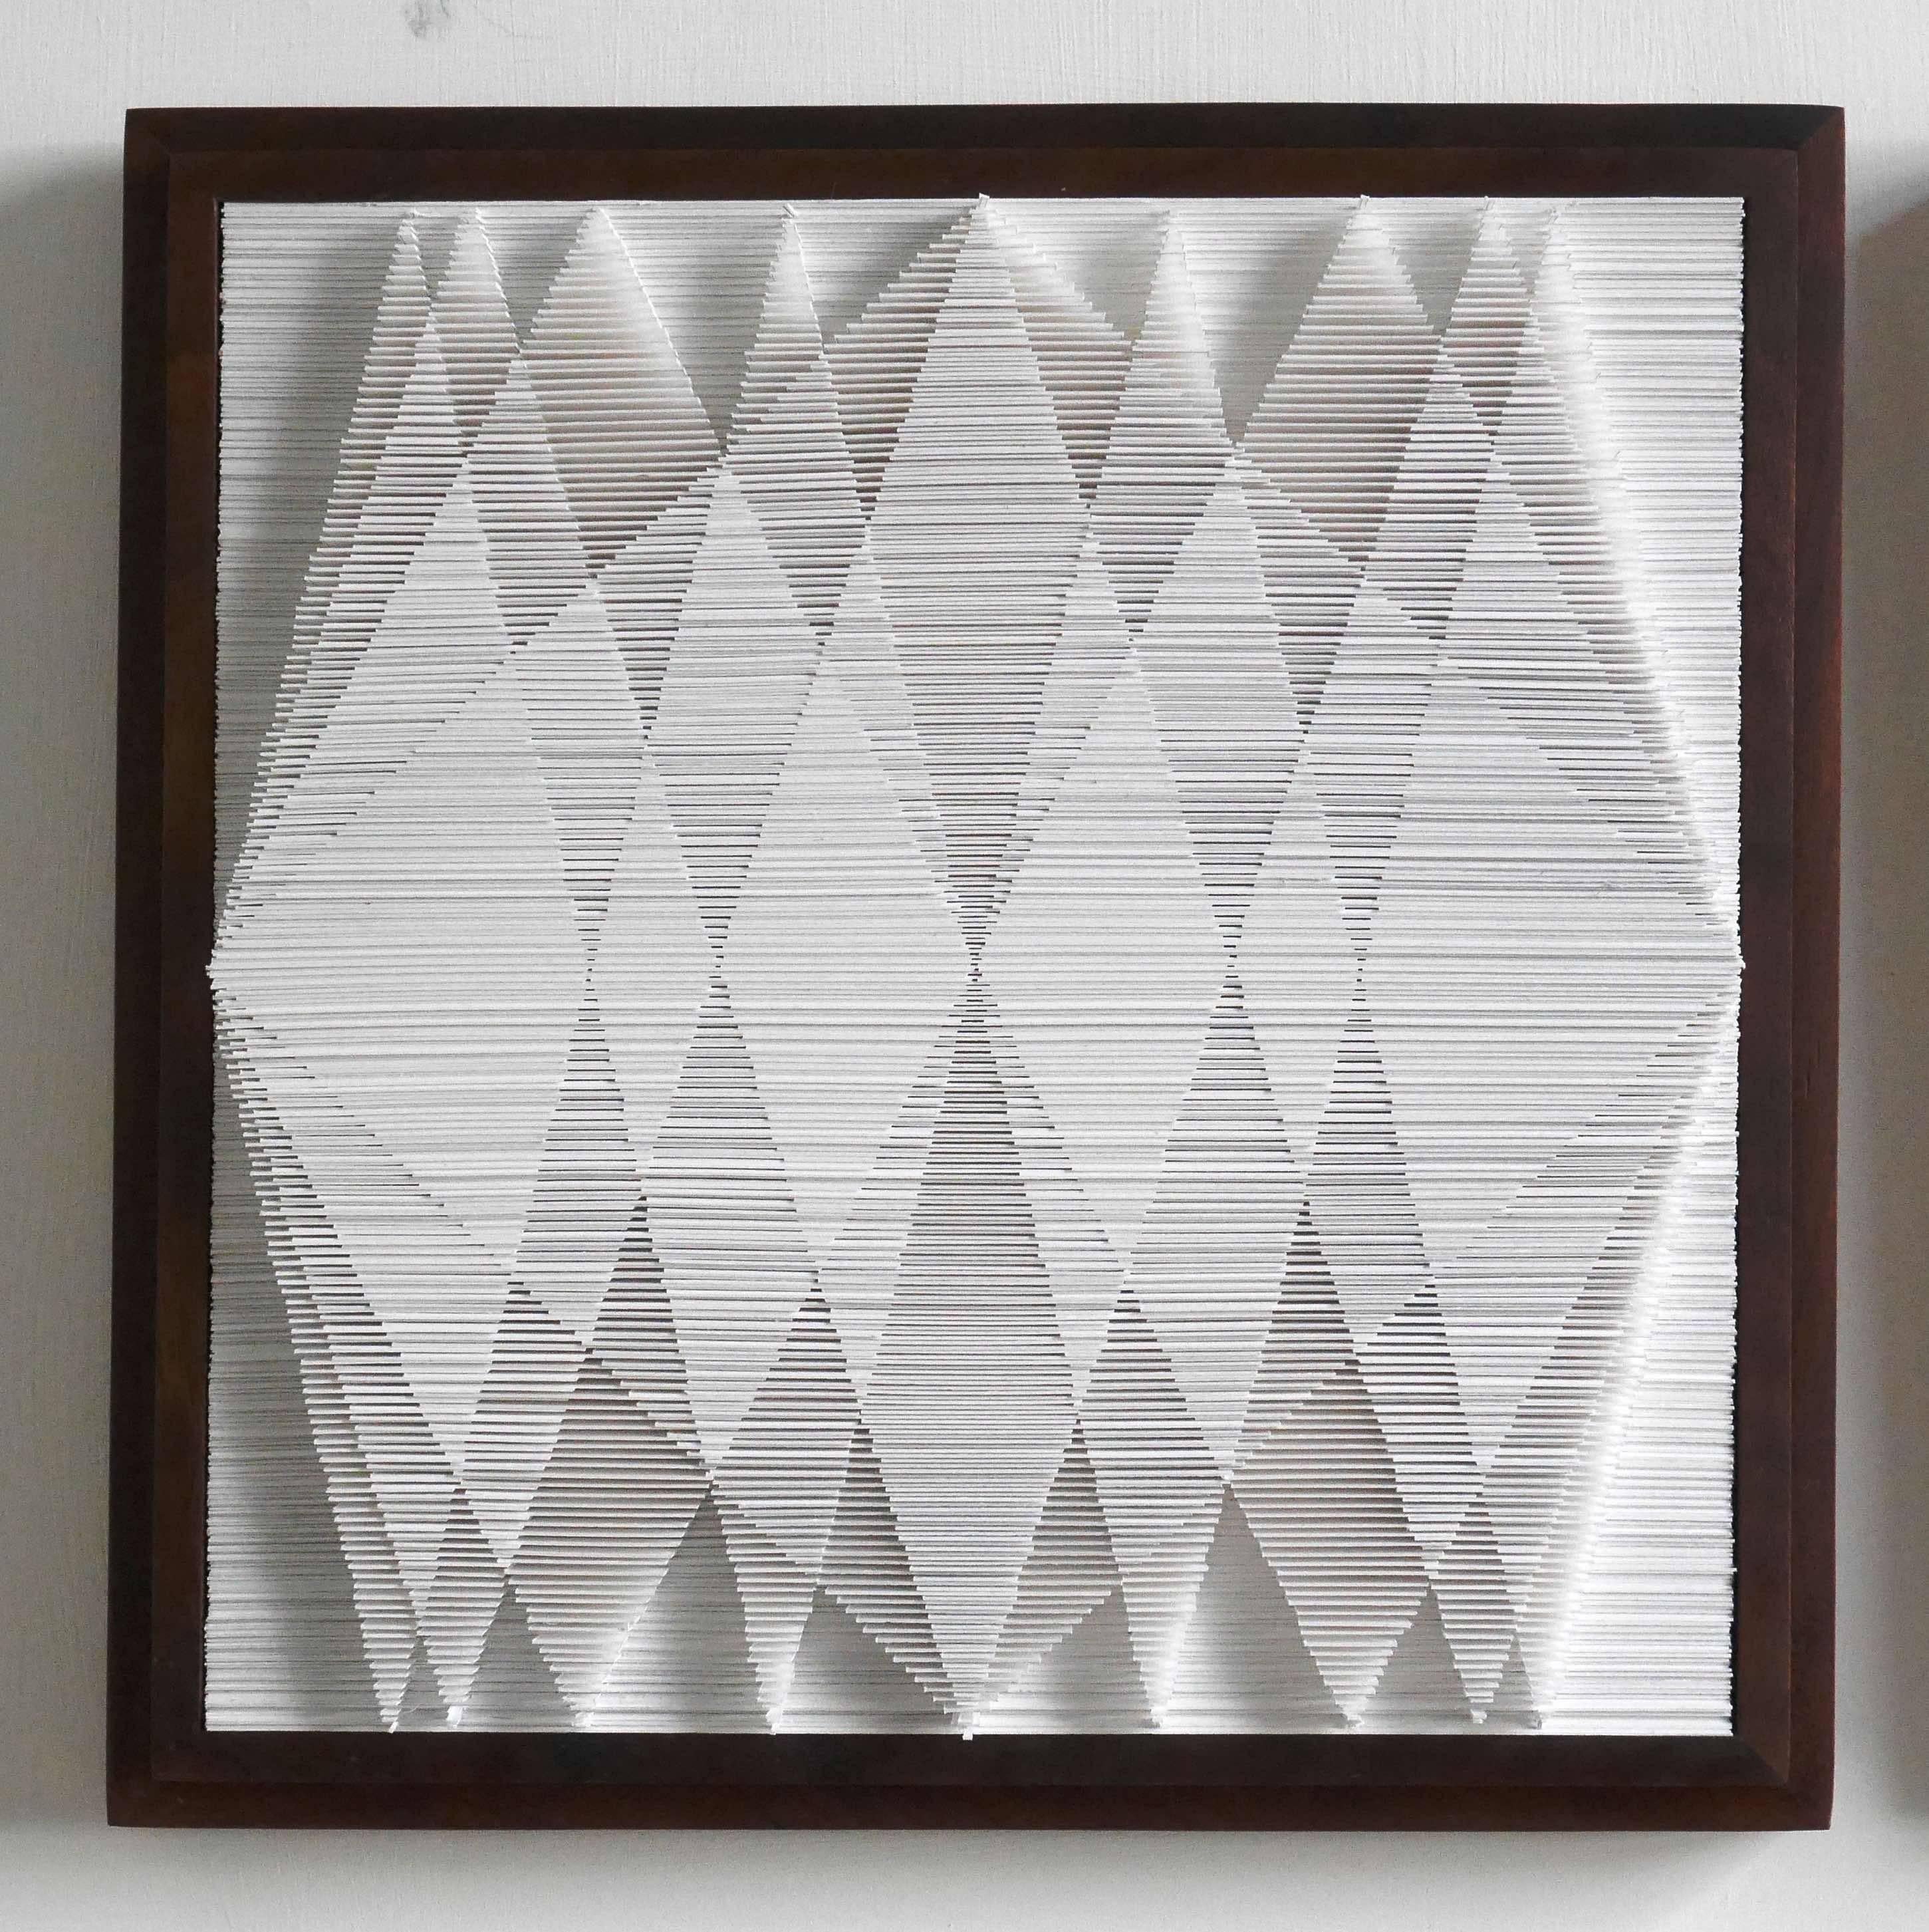 In this work, Sophie has taken the idea of stacked paper and turned it into a visual and contemplative experience.  Mounted in a wooden box frame, the cut edge of the paper forms a series of triangles that change shape as you move.

It is not